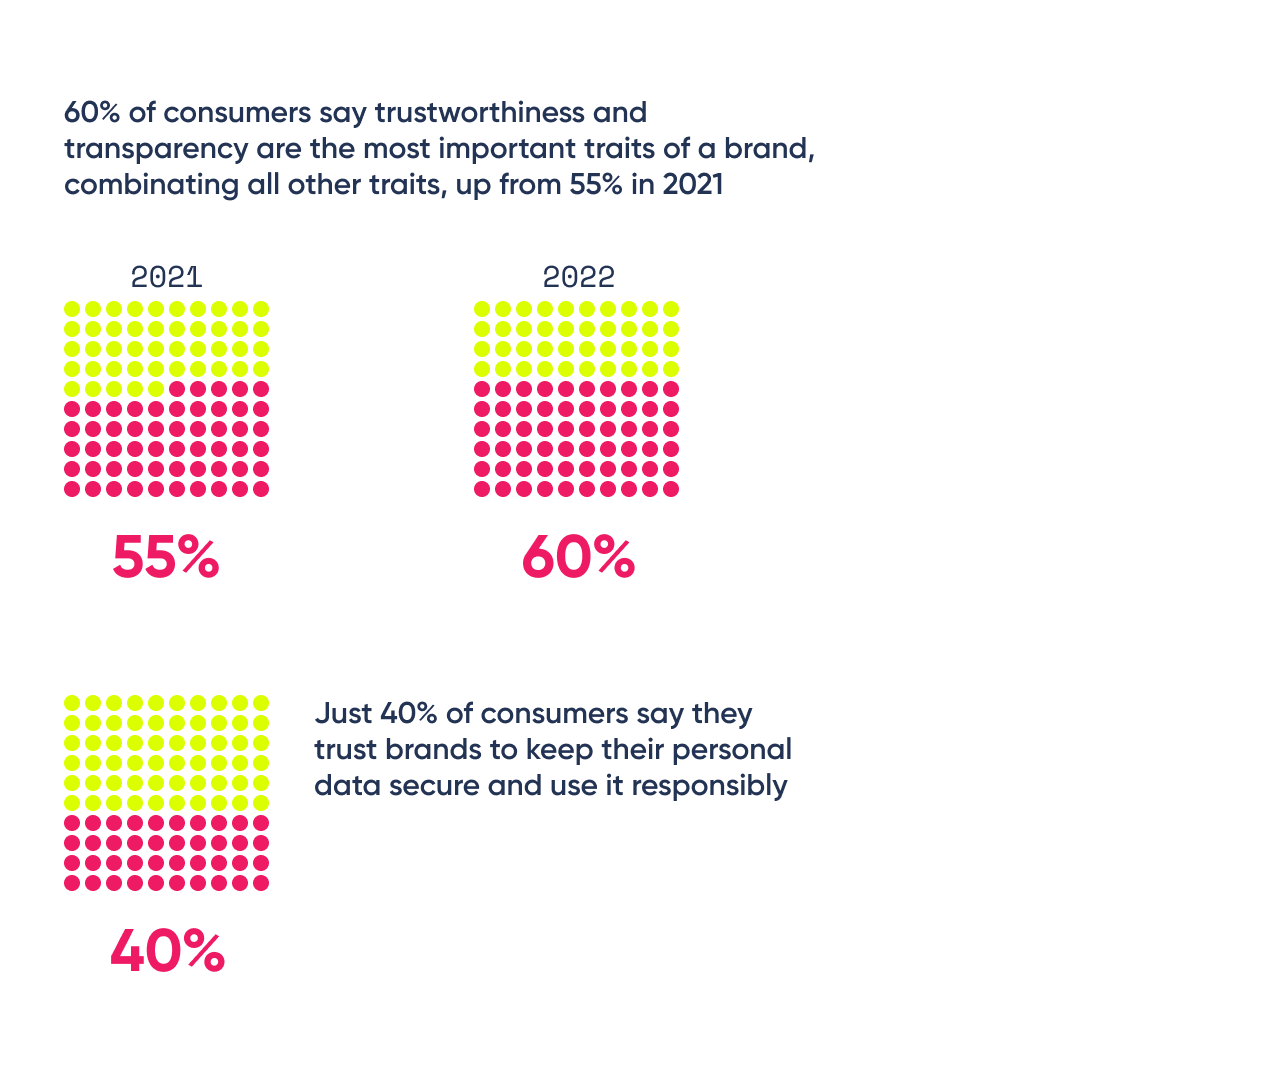 Source: The State of Personalization Report 2022